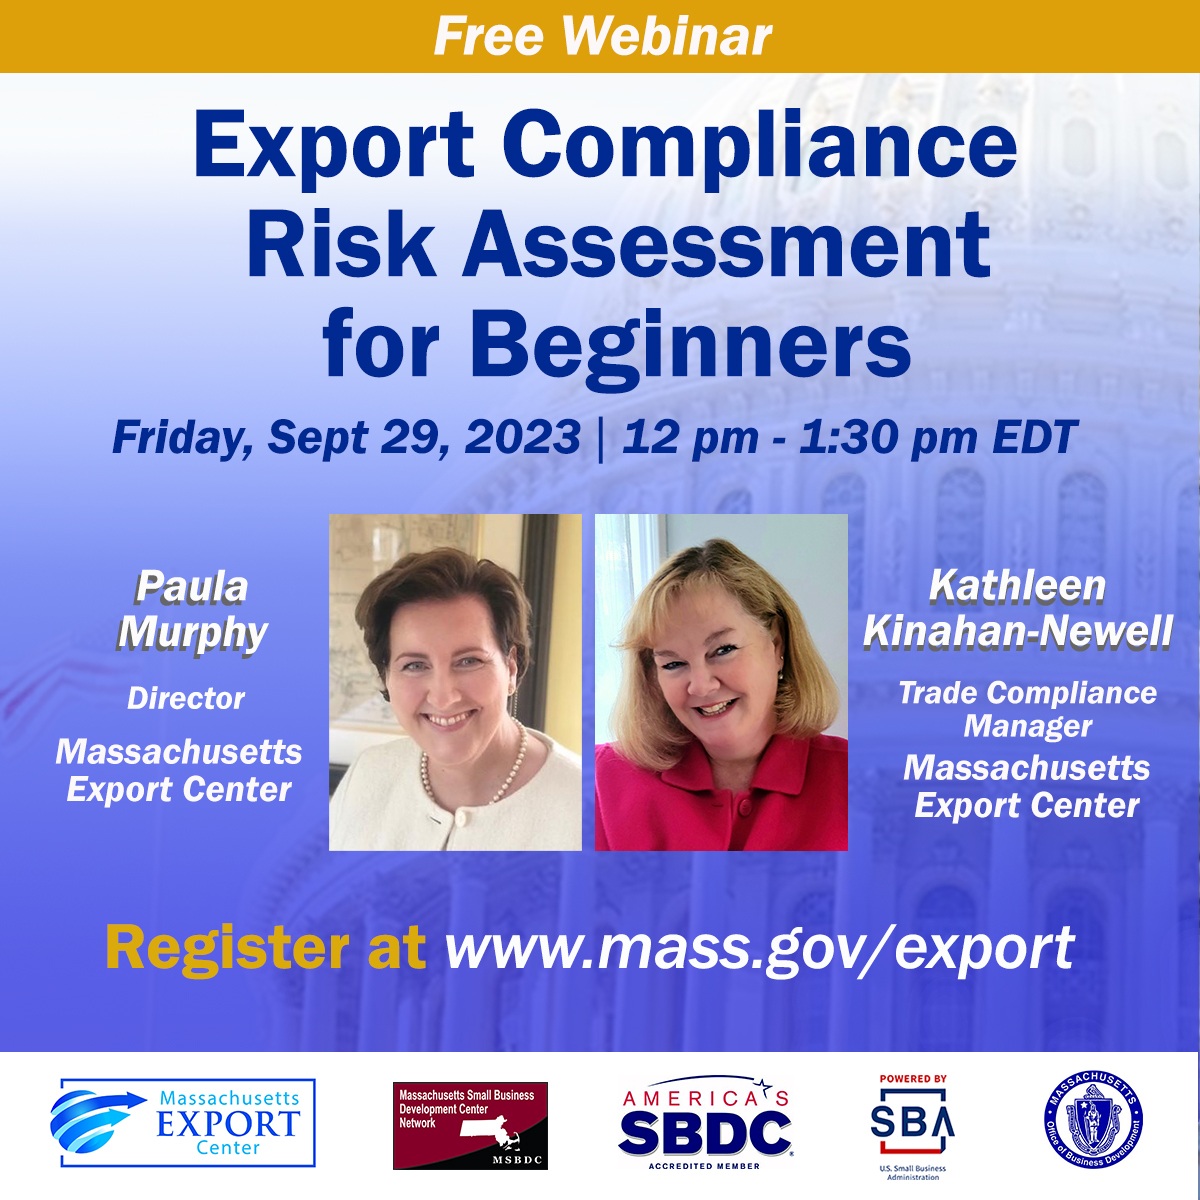 Join us to learn how to assess your #globaltrade #compliancerisks, and use that assessment to develop and implement controls to address those risks as part of your #ExportManagement and #ComplianceProgram.
Learn More: bit.ly/3RvjVs1